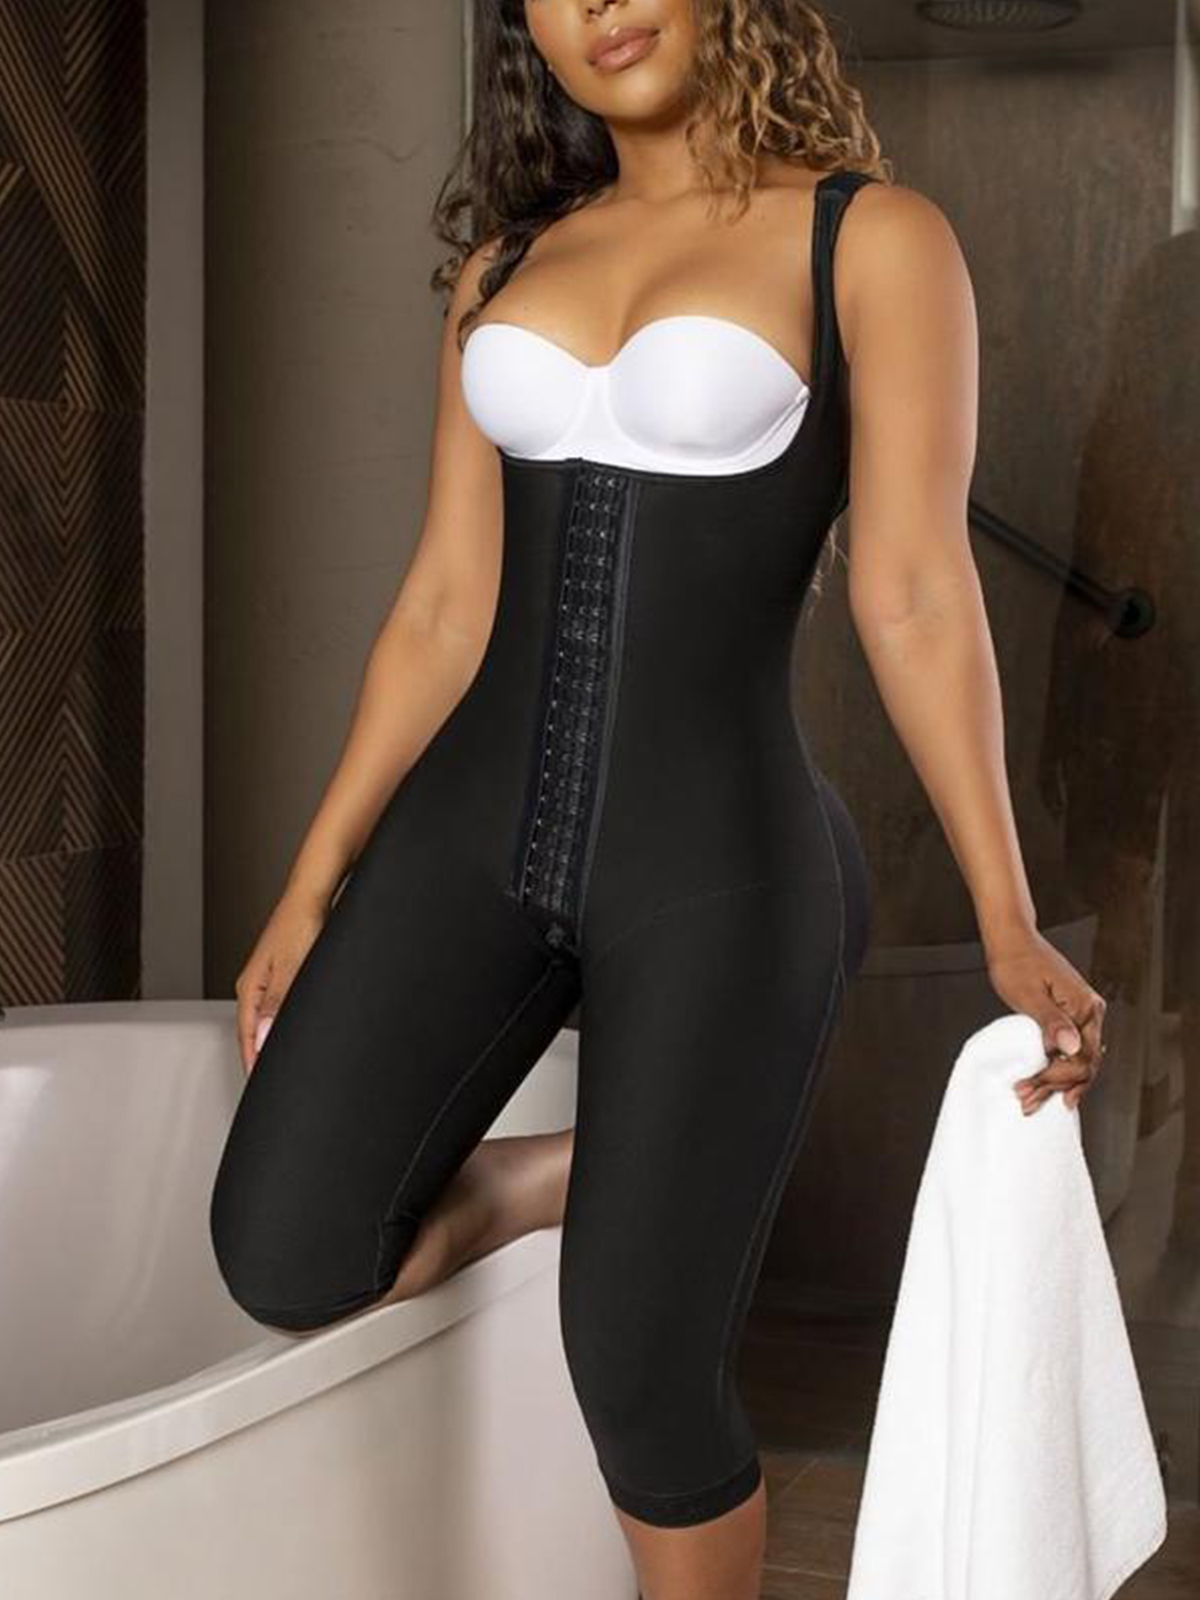 Style 27B - Mid Thigh Body Shaper with Bra Top Open Crotch